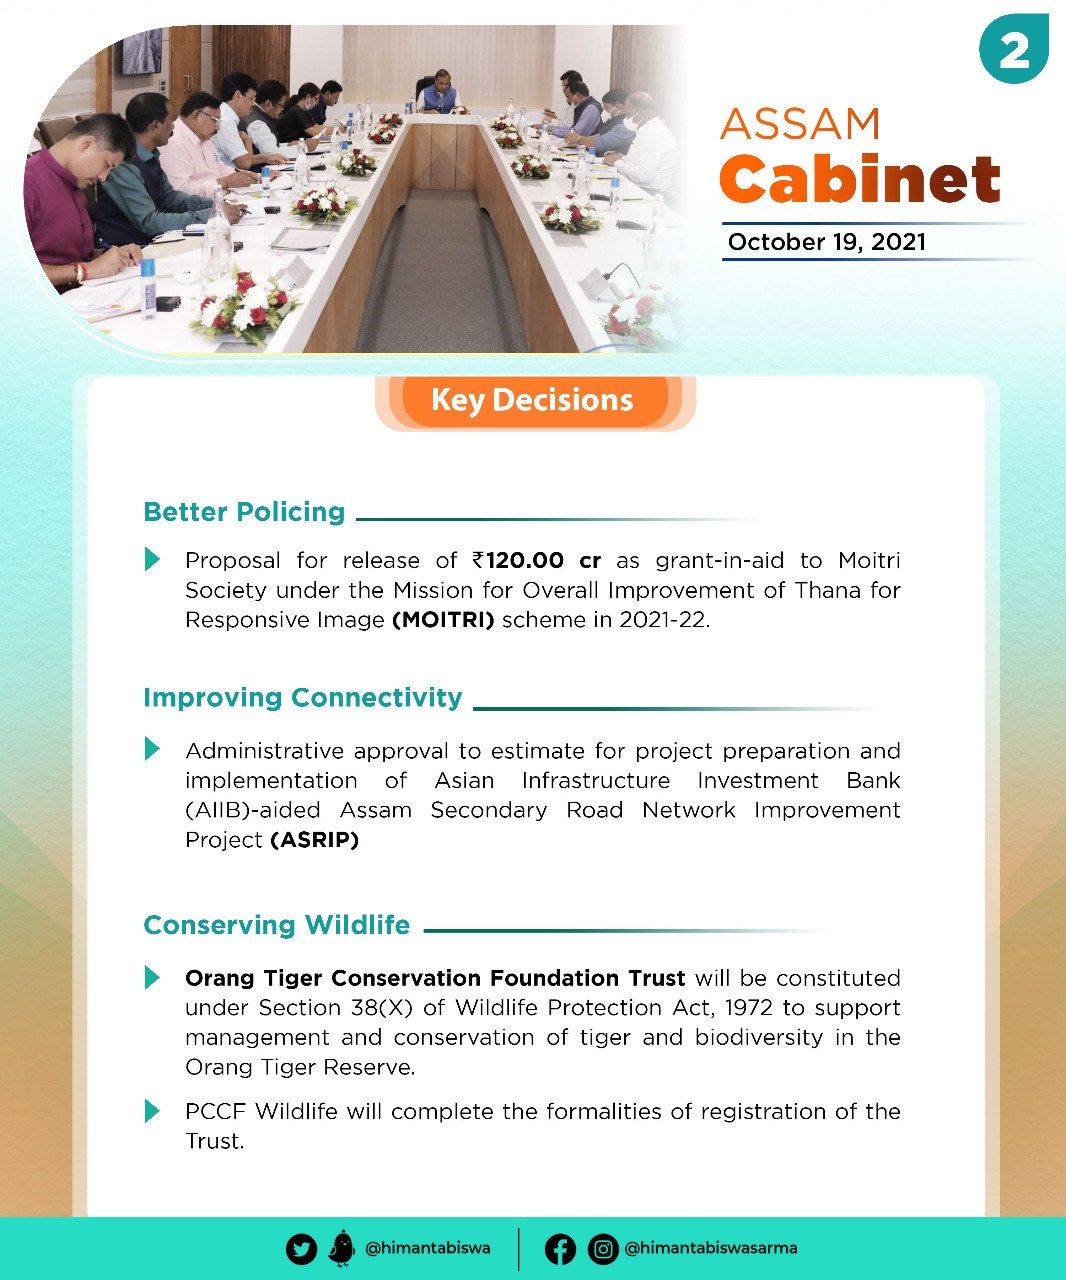 Cabinet Decision taken on 19th of October 2021 (2)